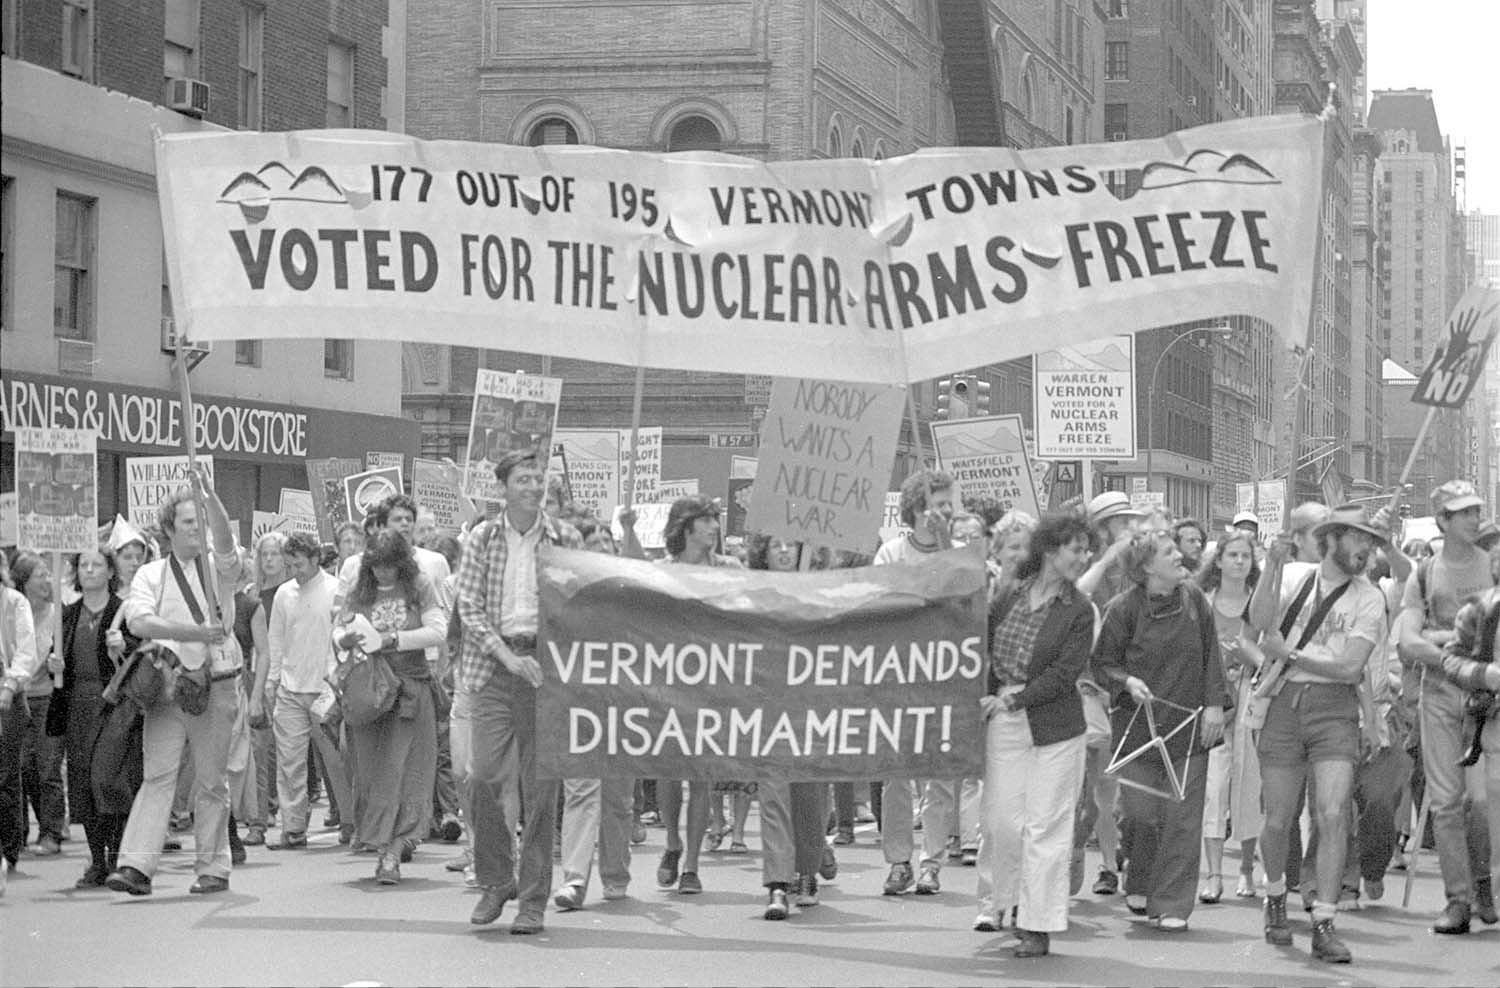 Black and white photo of a nuclear freeze march